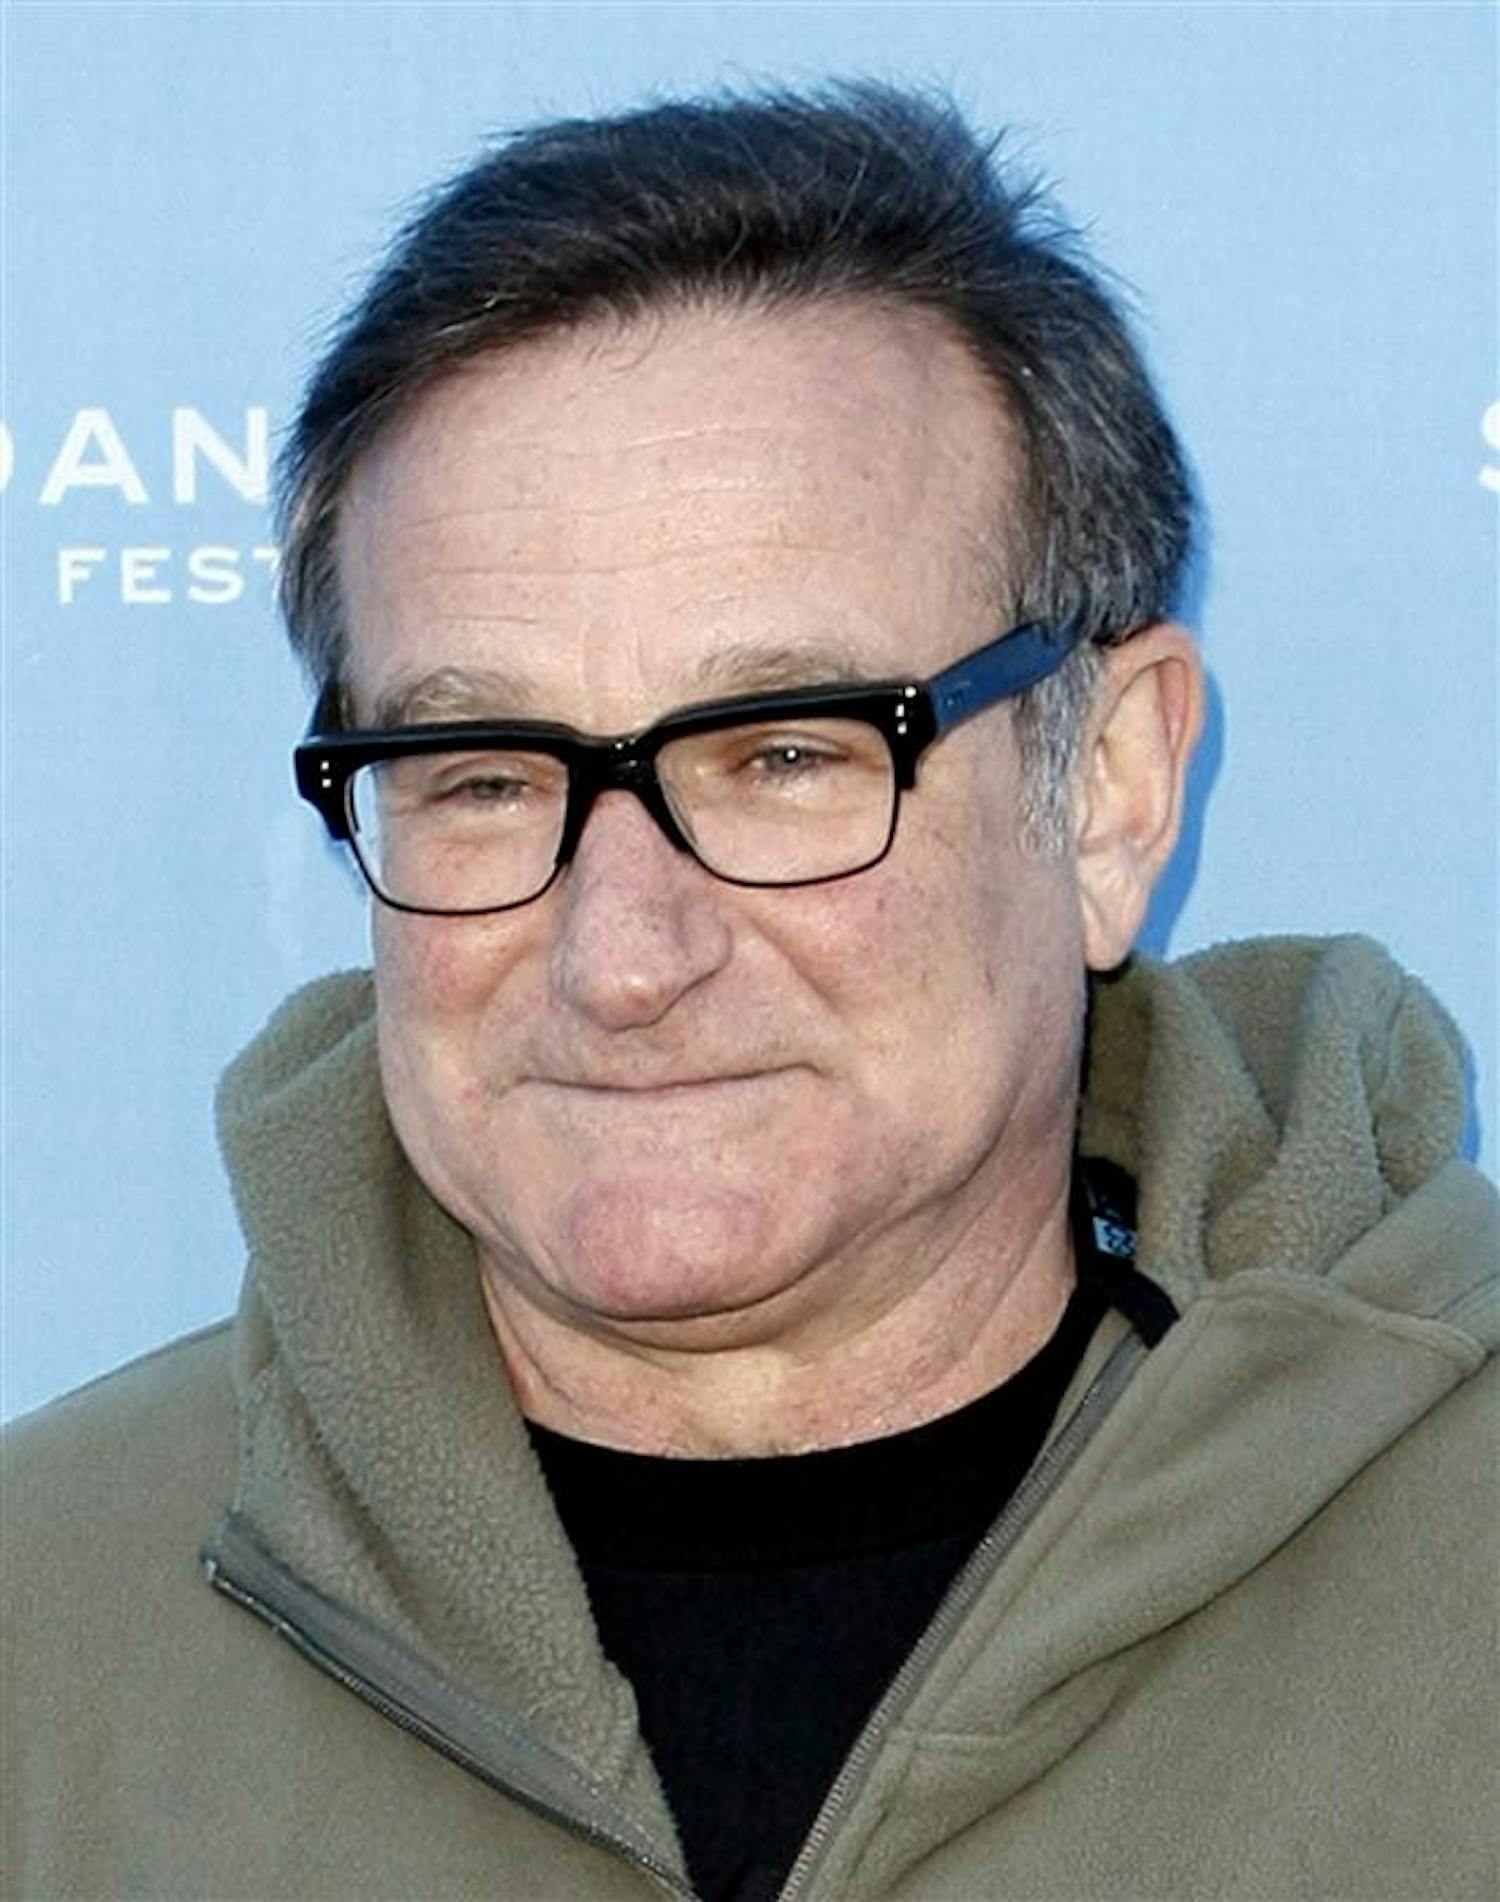  Robin Williams arrives at the premiere of "World's Greatest Dad" January 18, 2009 at the Sundance Film Festival in Park City, Utah.